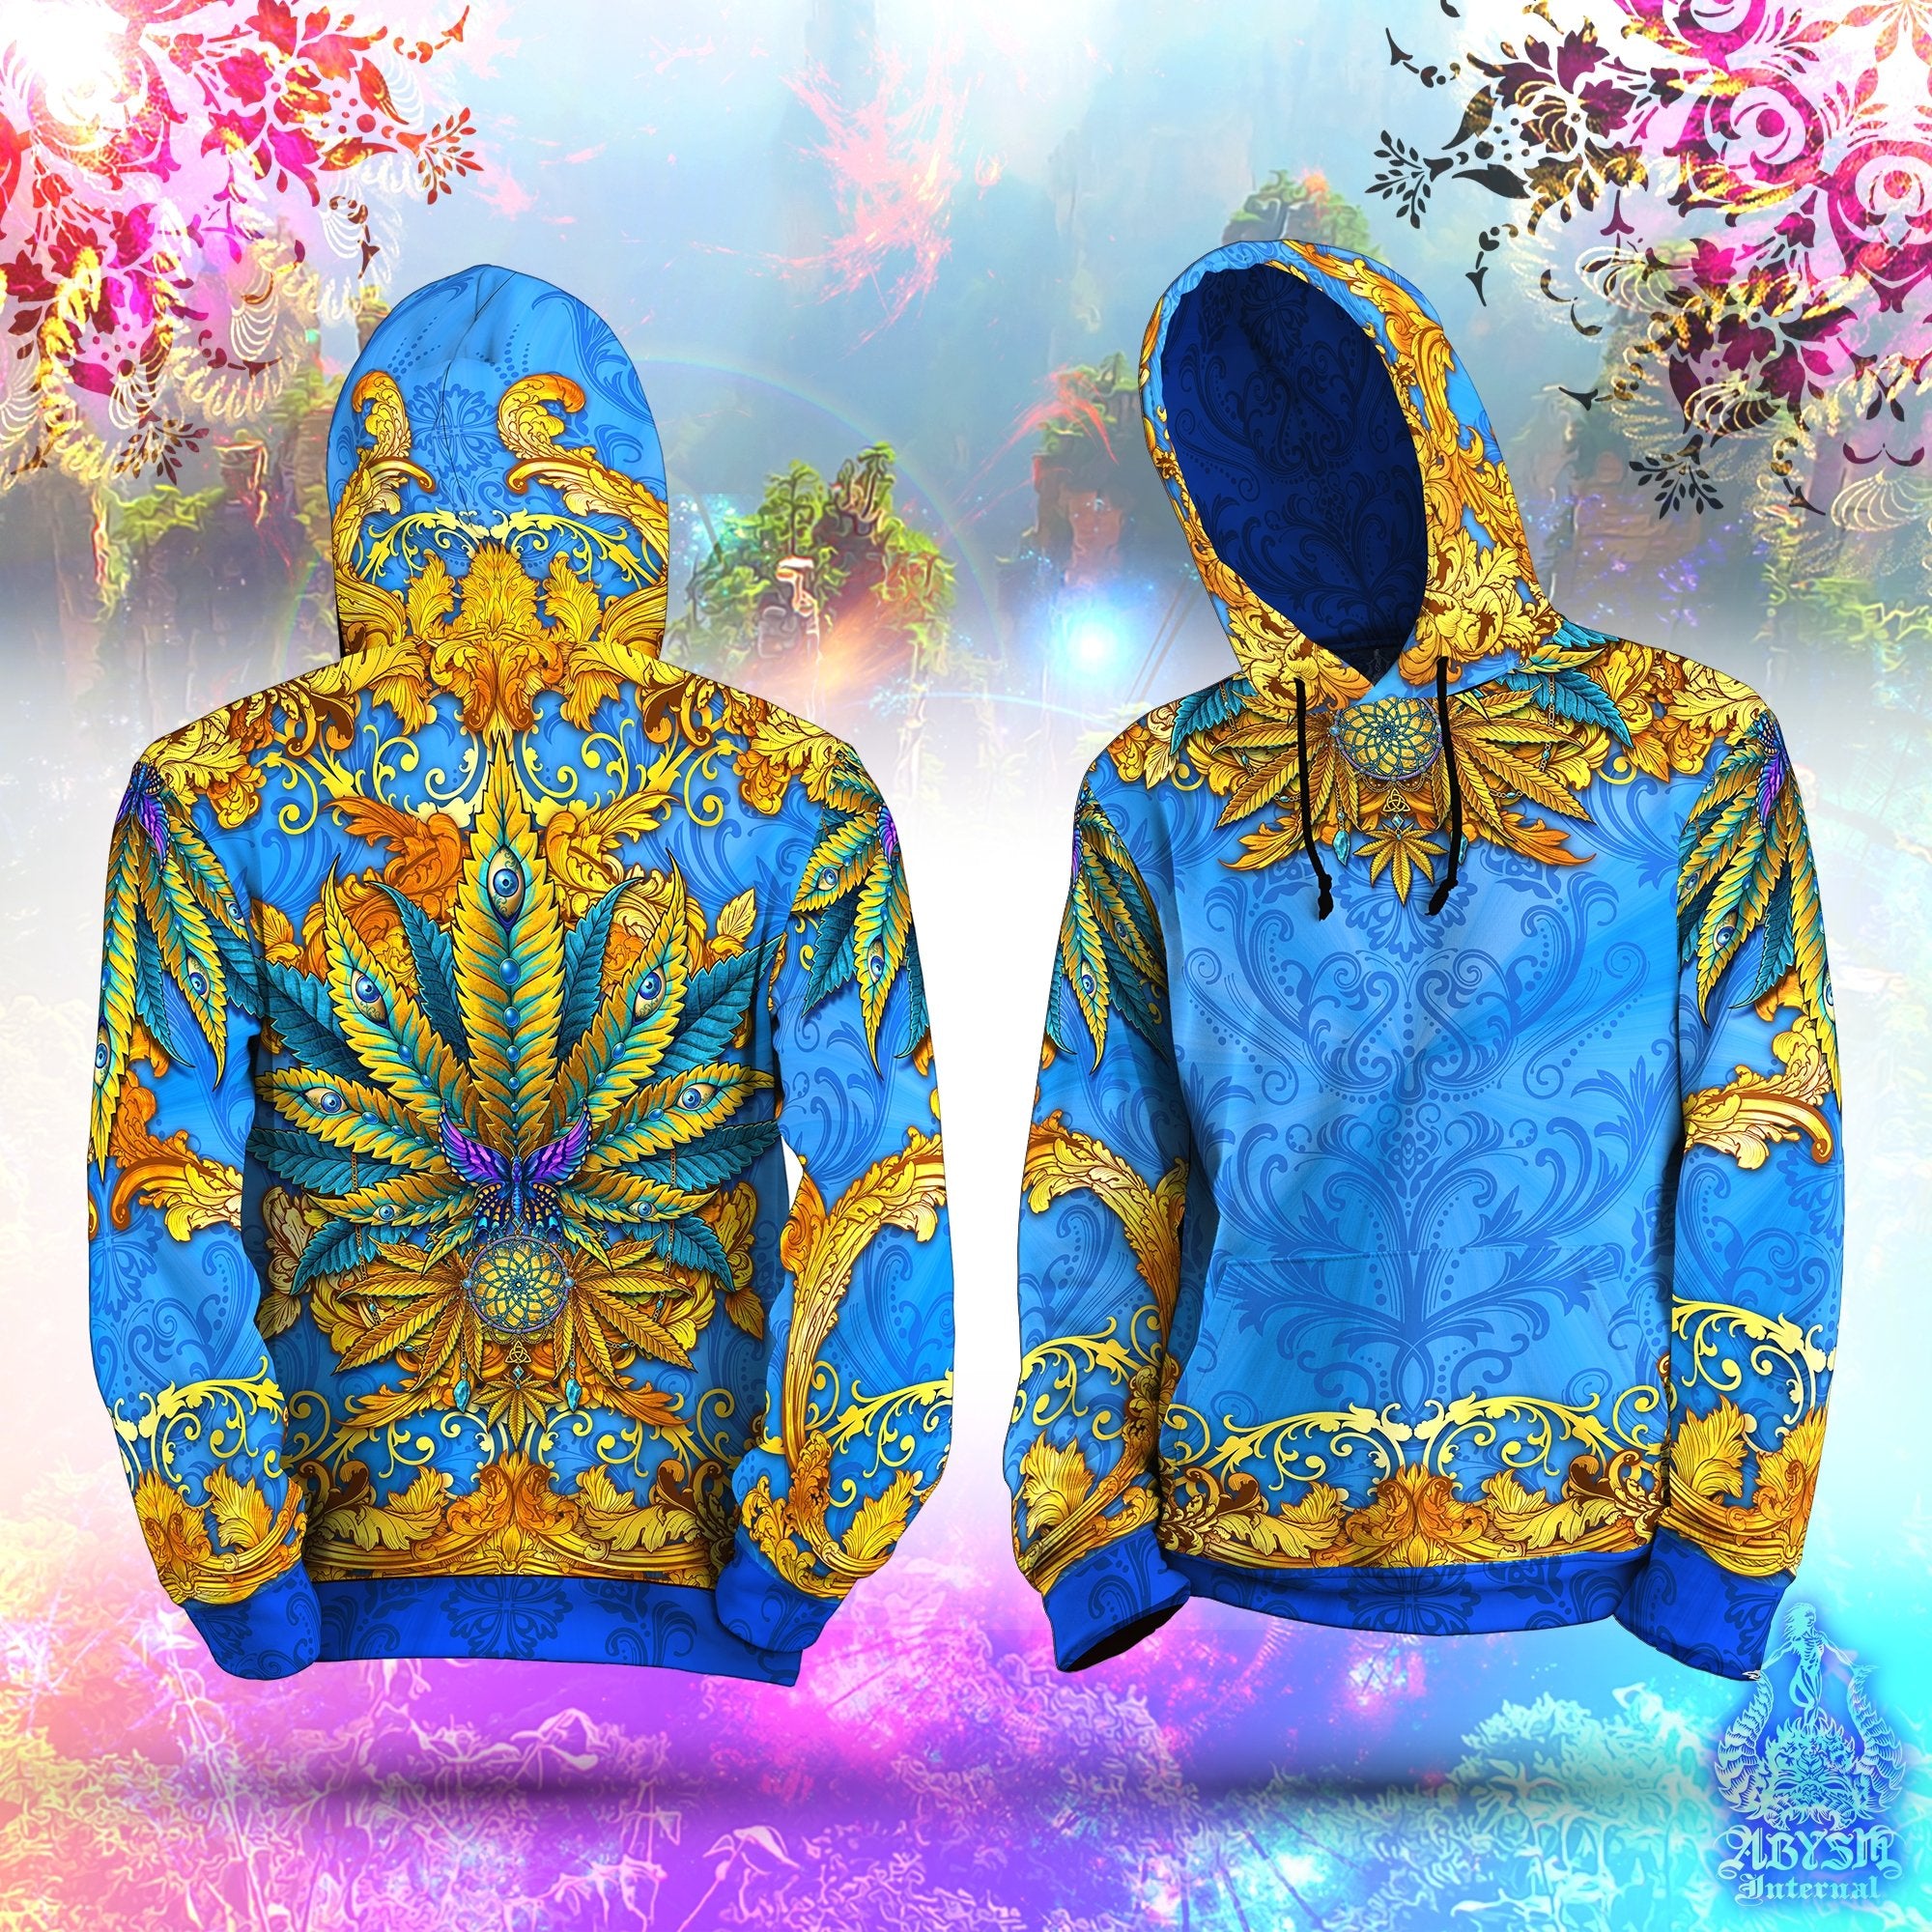 Weed Hoodie, Cannabis Festival Sweater, Hippie Outfit, Trippy Streetwear, Indie and Alternative Clothing, Unisex, 420 Gift - Marijuana, Cyan and Gold - Abysm Internal